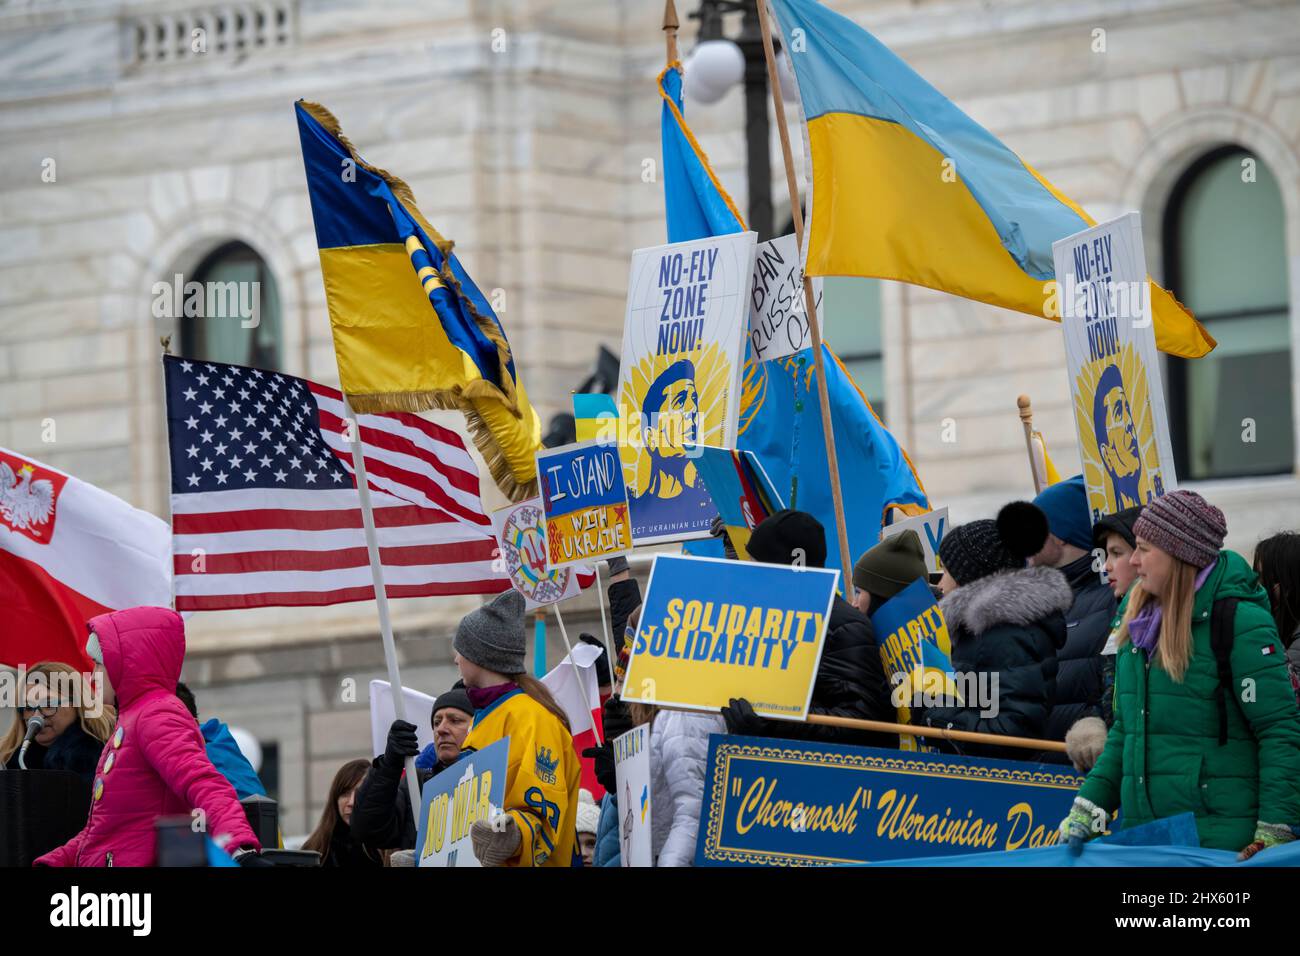 St. Paul, Minnesota. People rally to support the Ukrainian people and Ukraine's sovereignty and stop the war that Russia is waging against them. Stock Photo